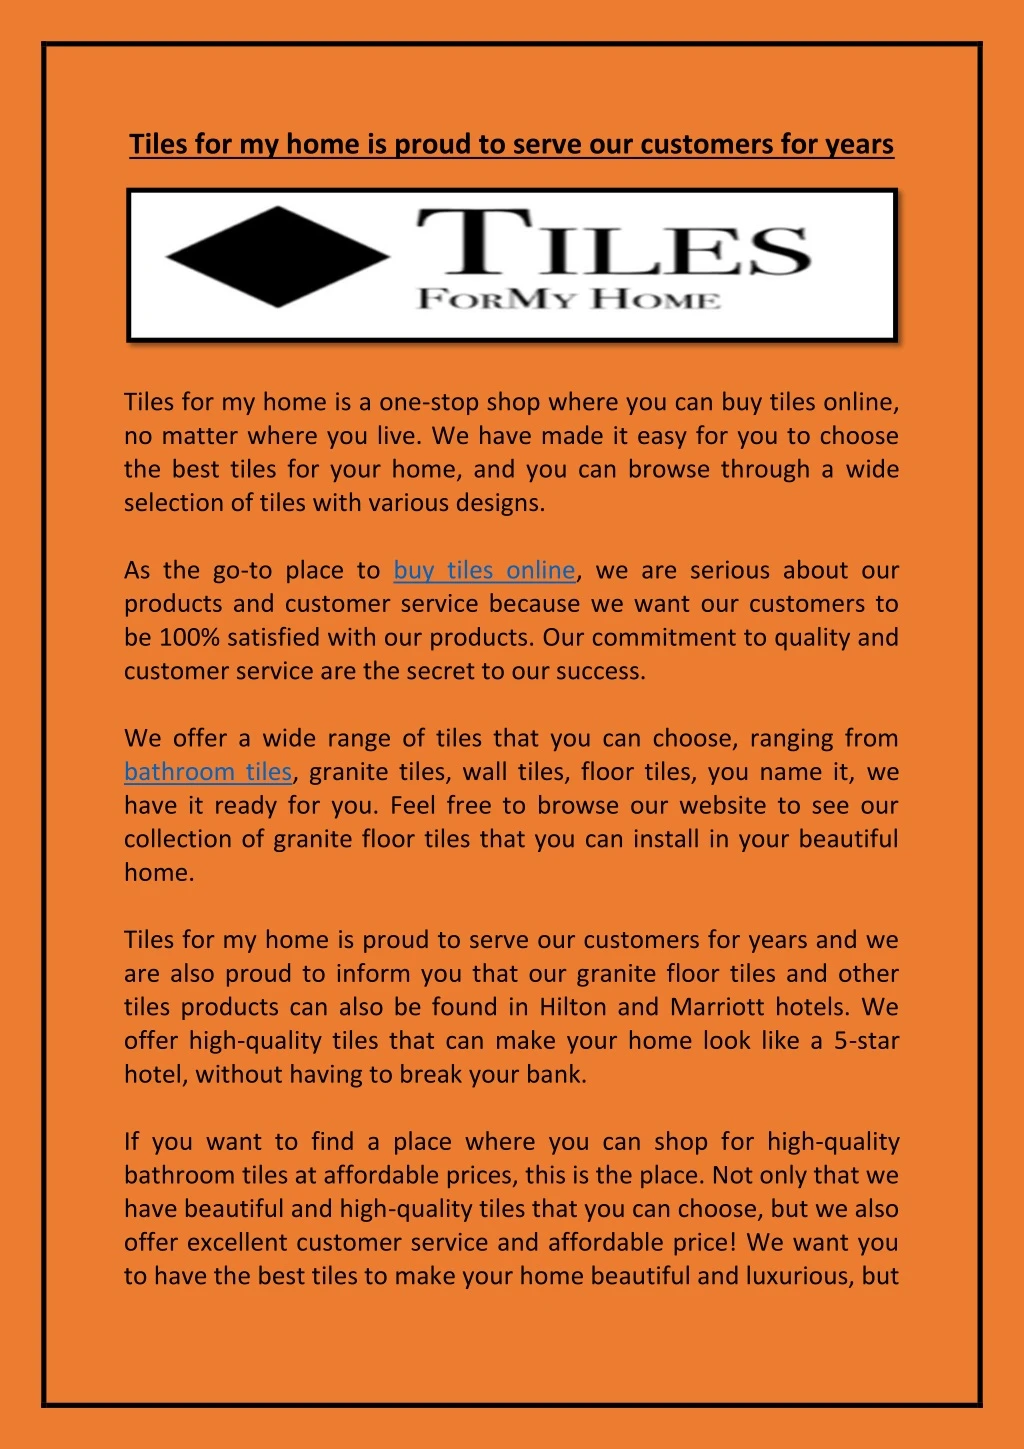 tiles for my home is proud to serve our customers